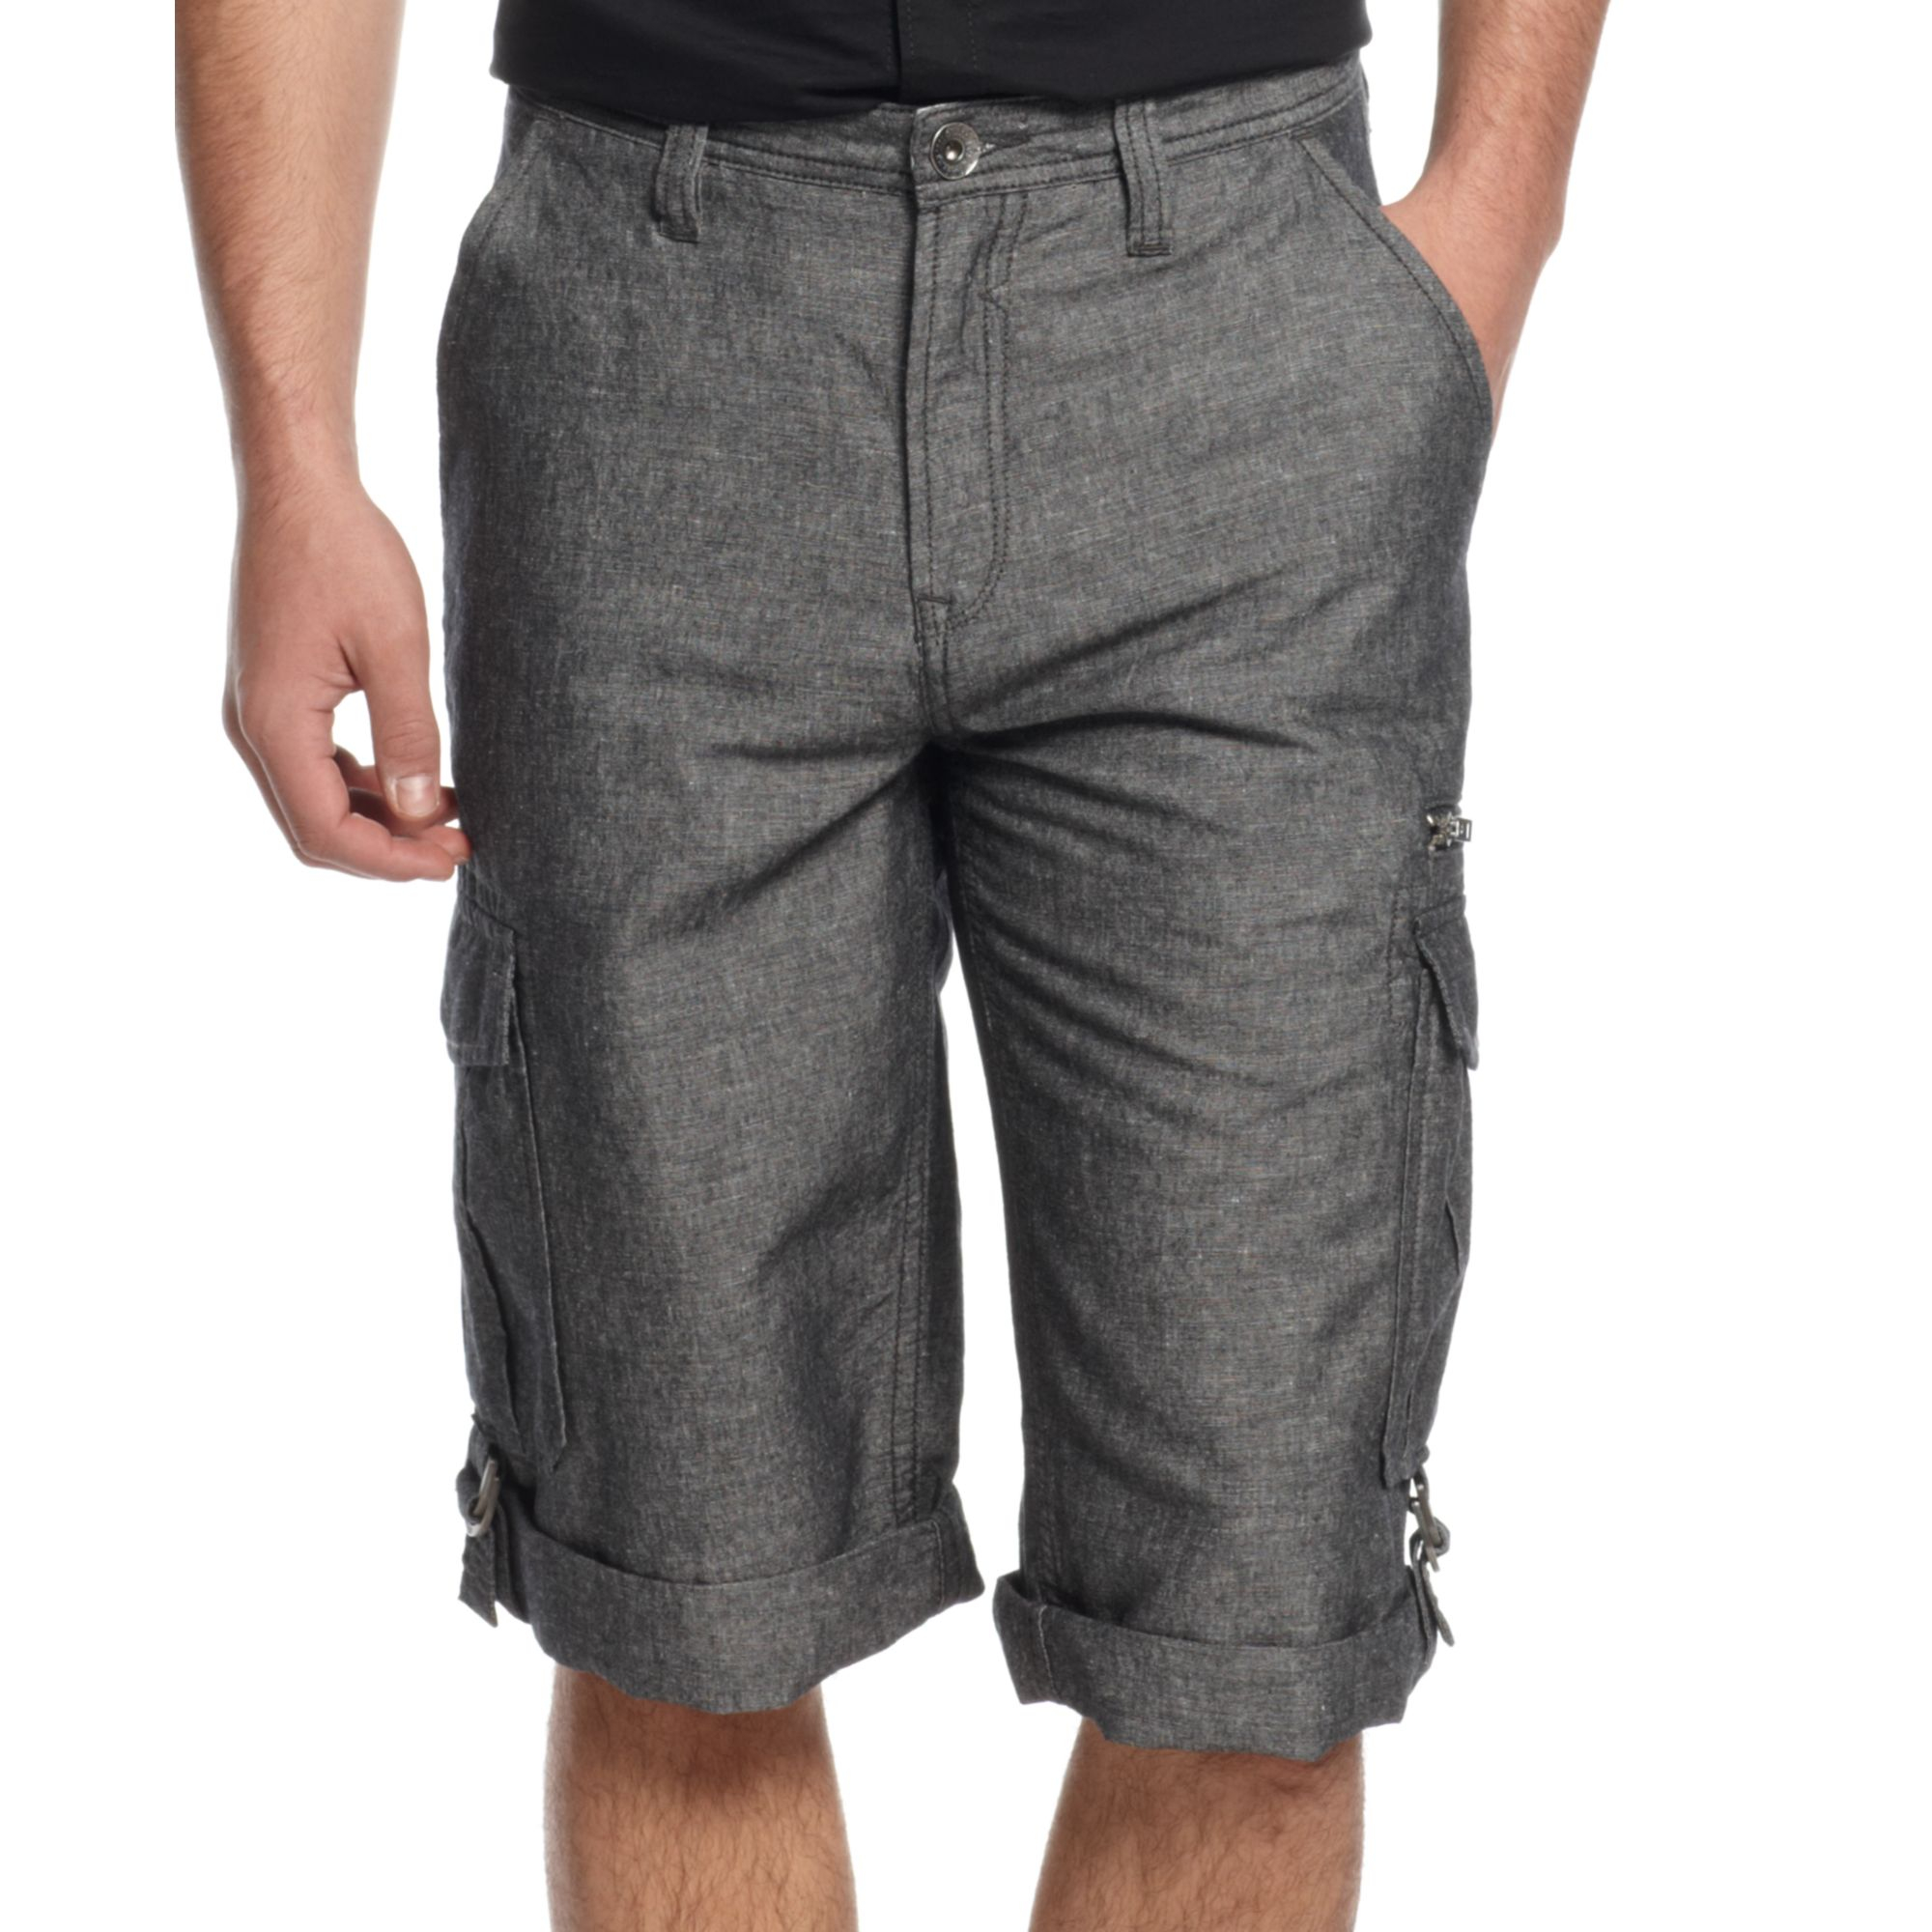 Lyst - Guess Jeans Linenblend Fatigue Shorts in Black for Men